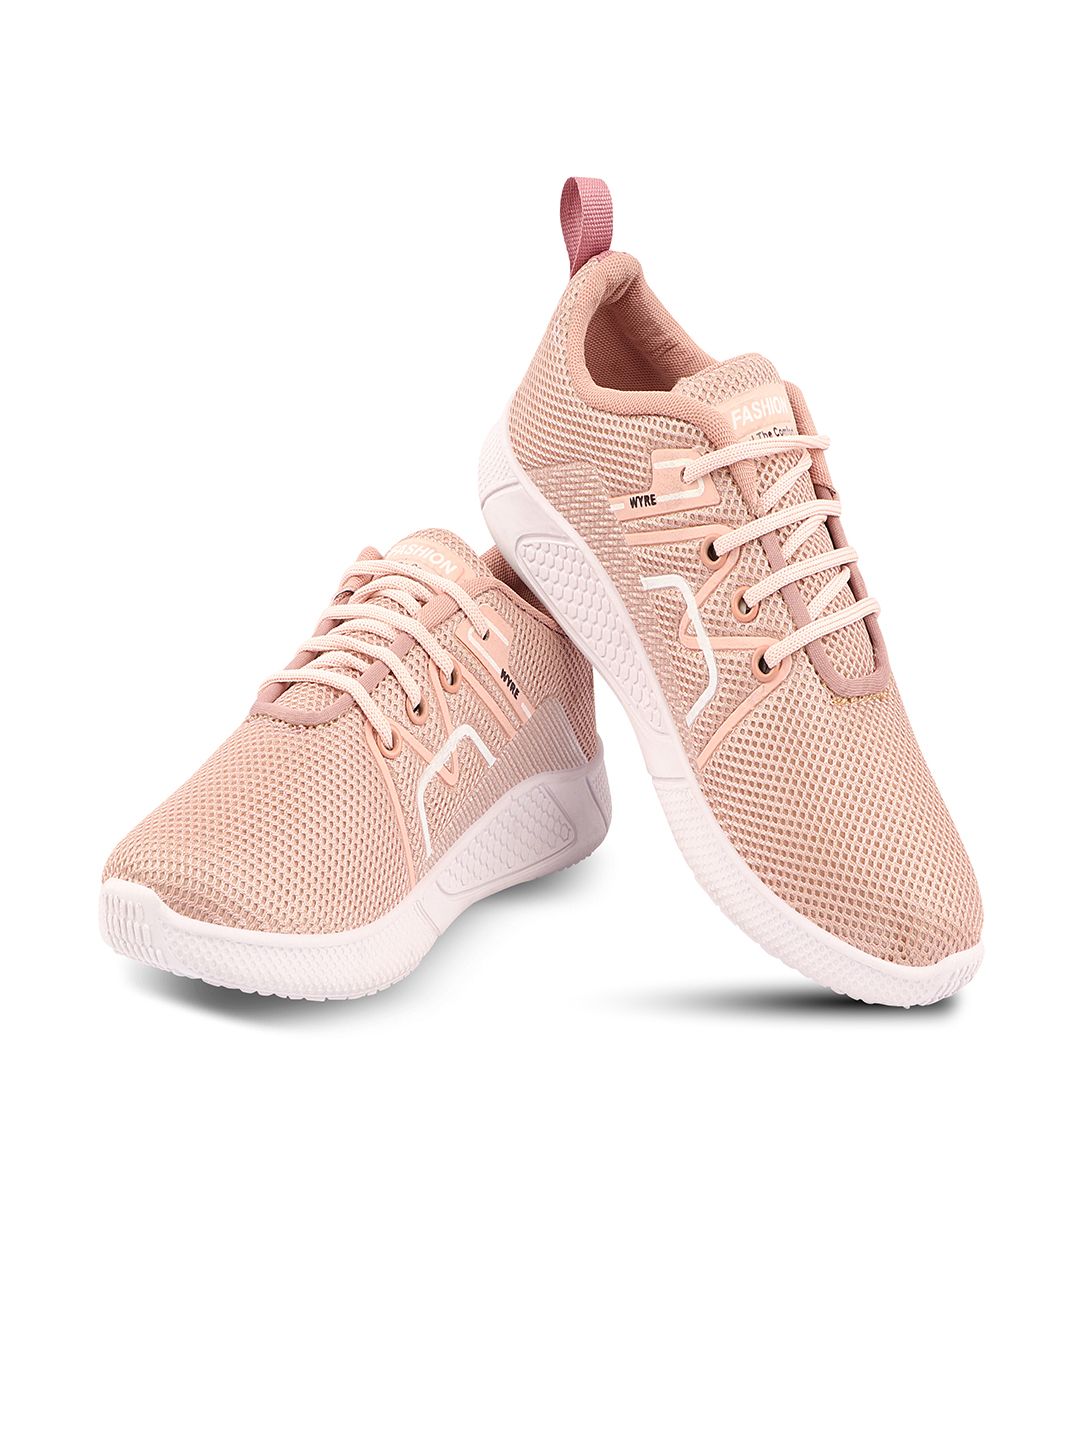 BEONZA Women Peach-Coloured Mesh Running Non-Marking Shoes Price in India